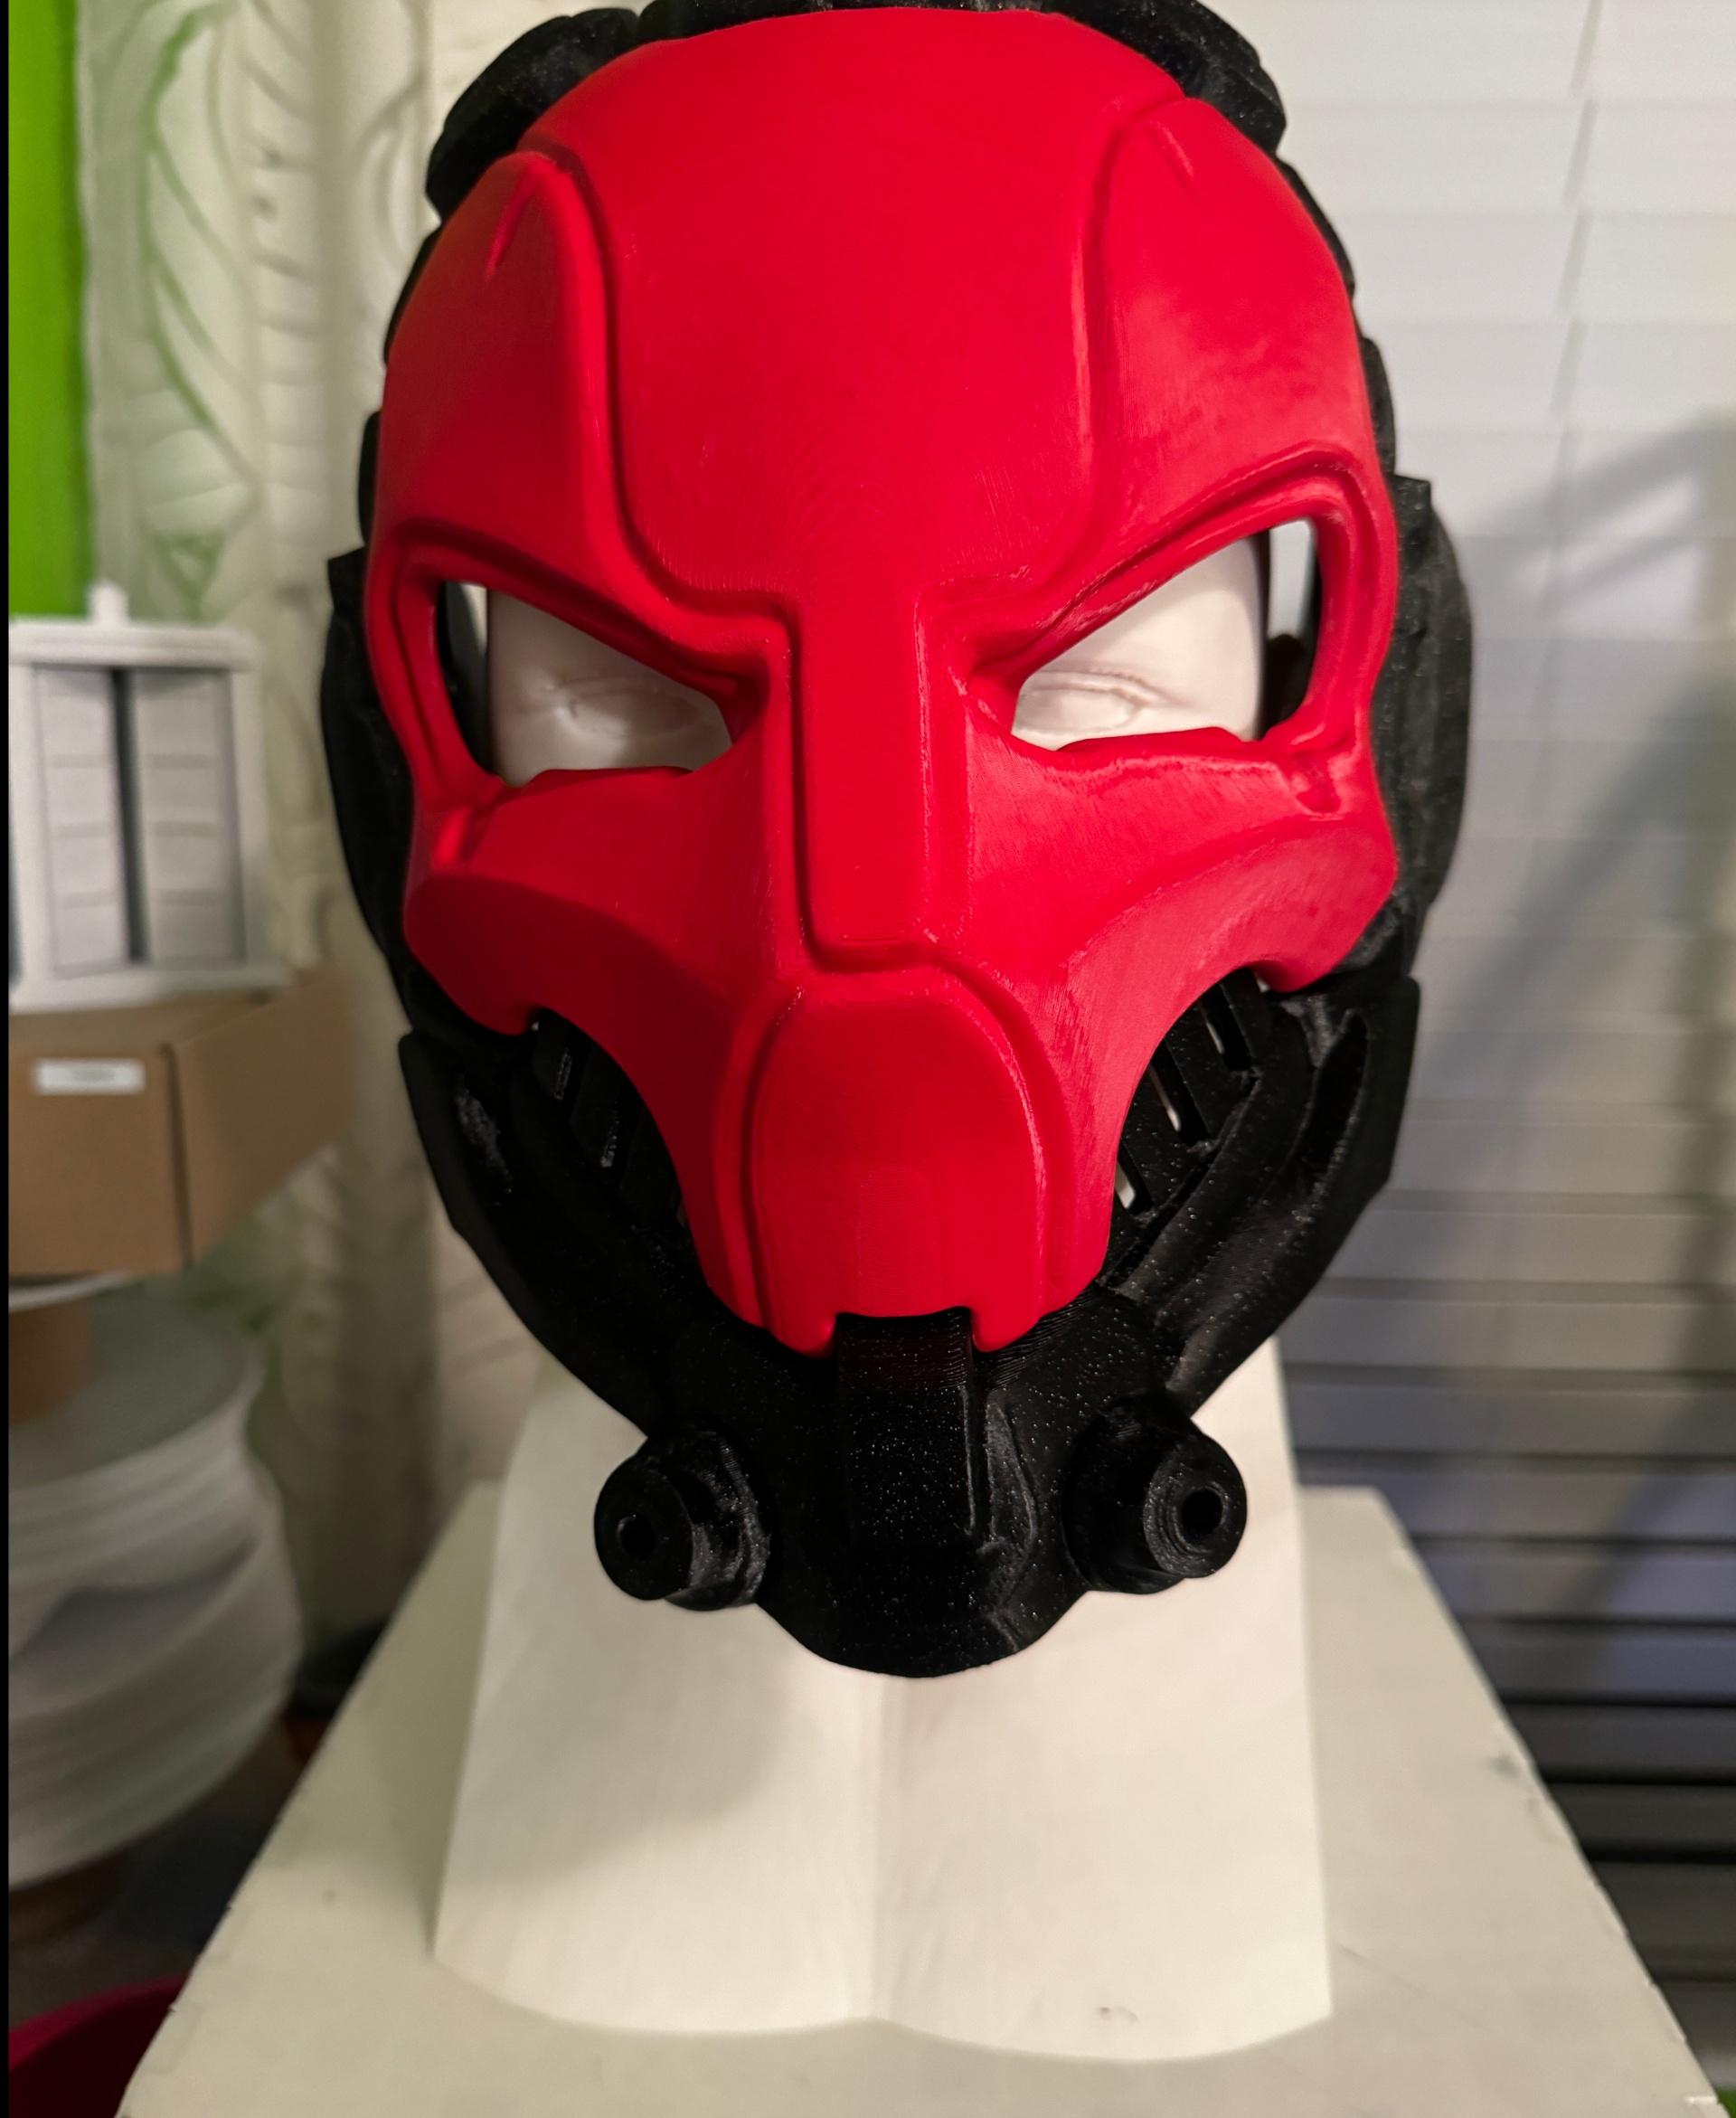 Cyber Skull Helmet - Wearable  - Printed in Polymaker Polylite Galaxy Black and Wine Red PLA; displayed on a life-size mannequin head (also printed about two years ago). This one wouldn't fit in my light box, so you get it this way.

Love this mask! I want to rig it with lights. - 3d model